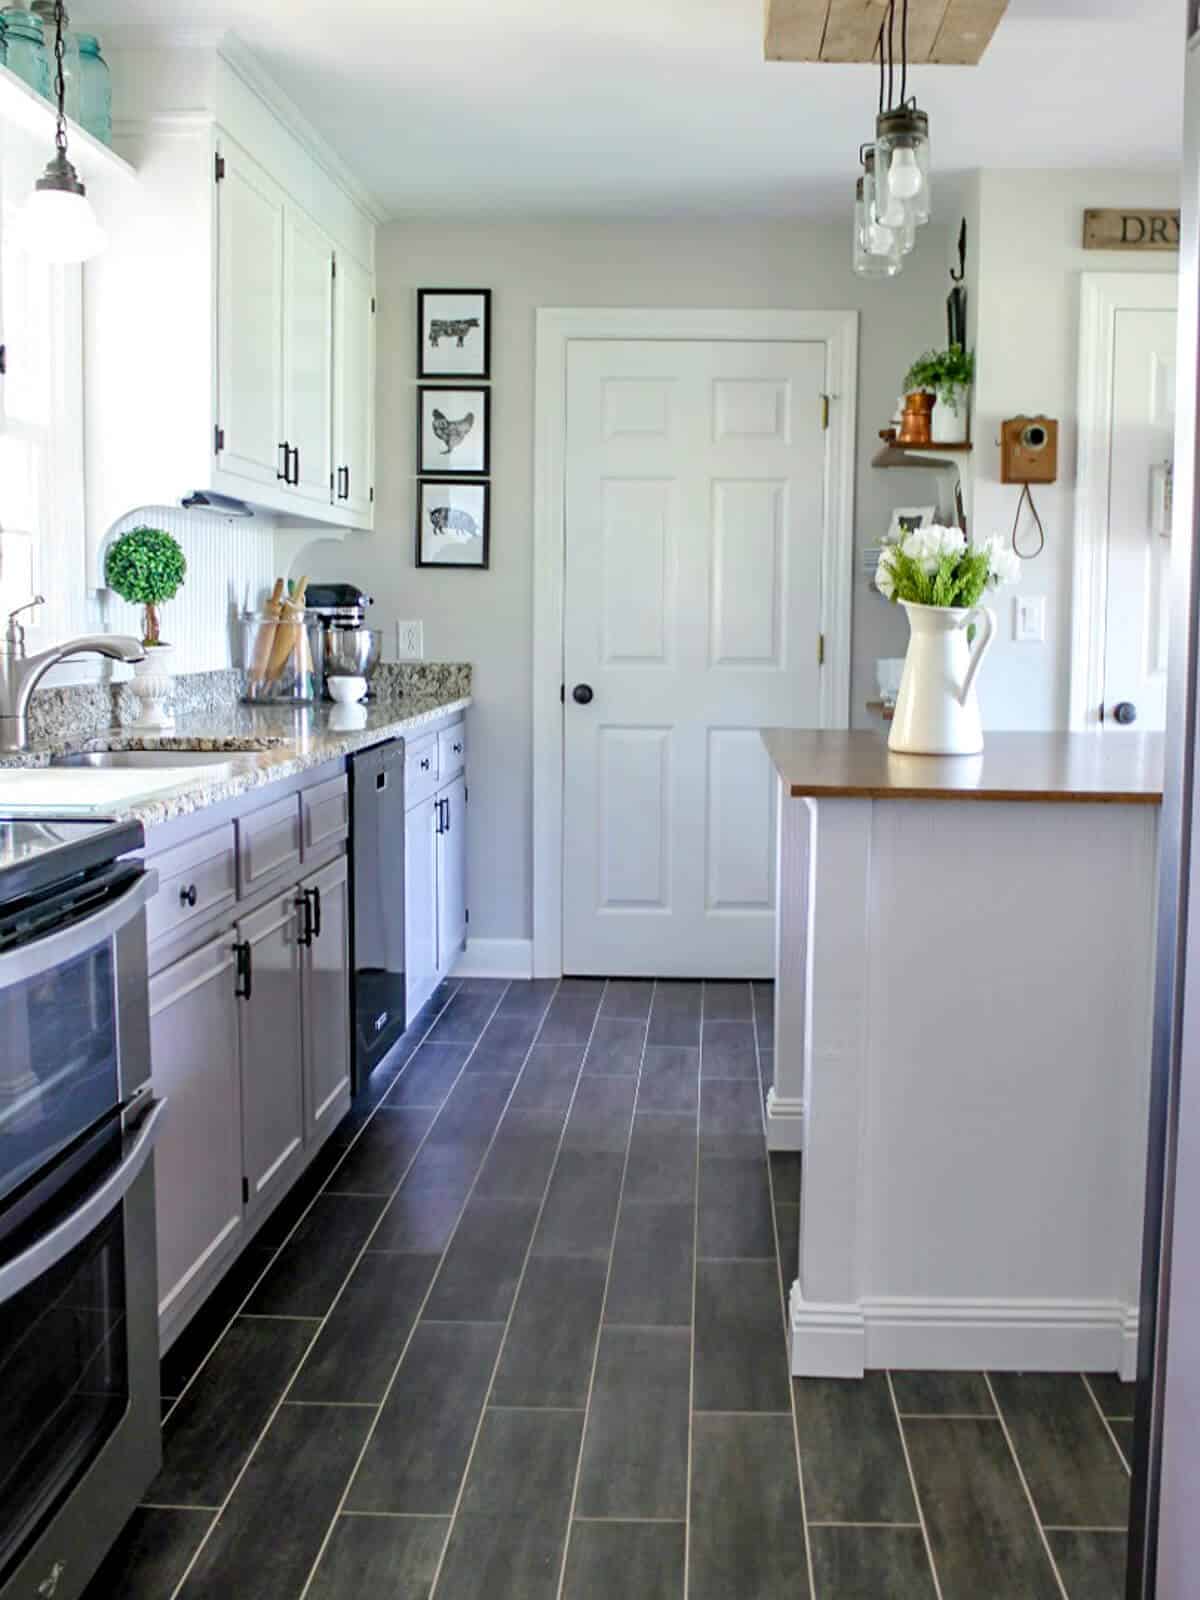 DIY Flooring: How We Changed our Kitchen in 3 days for Less than $400